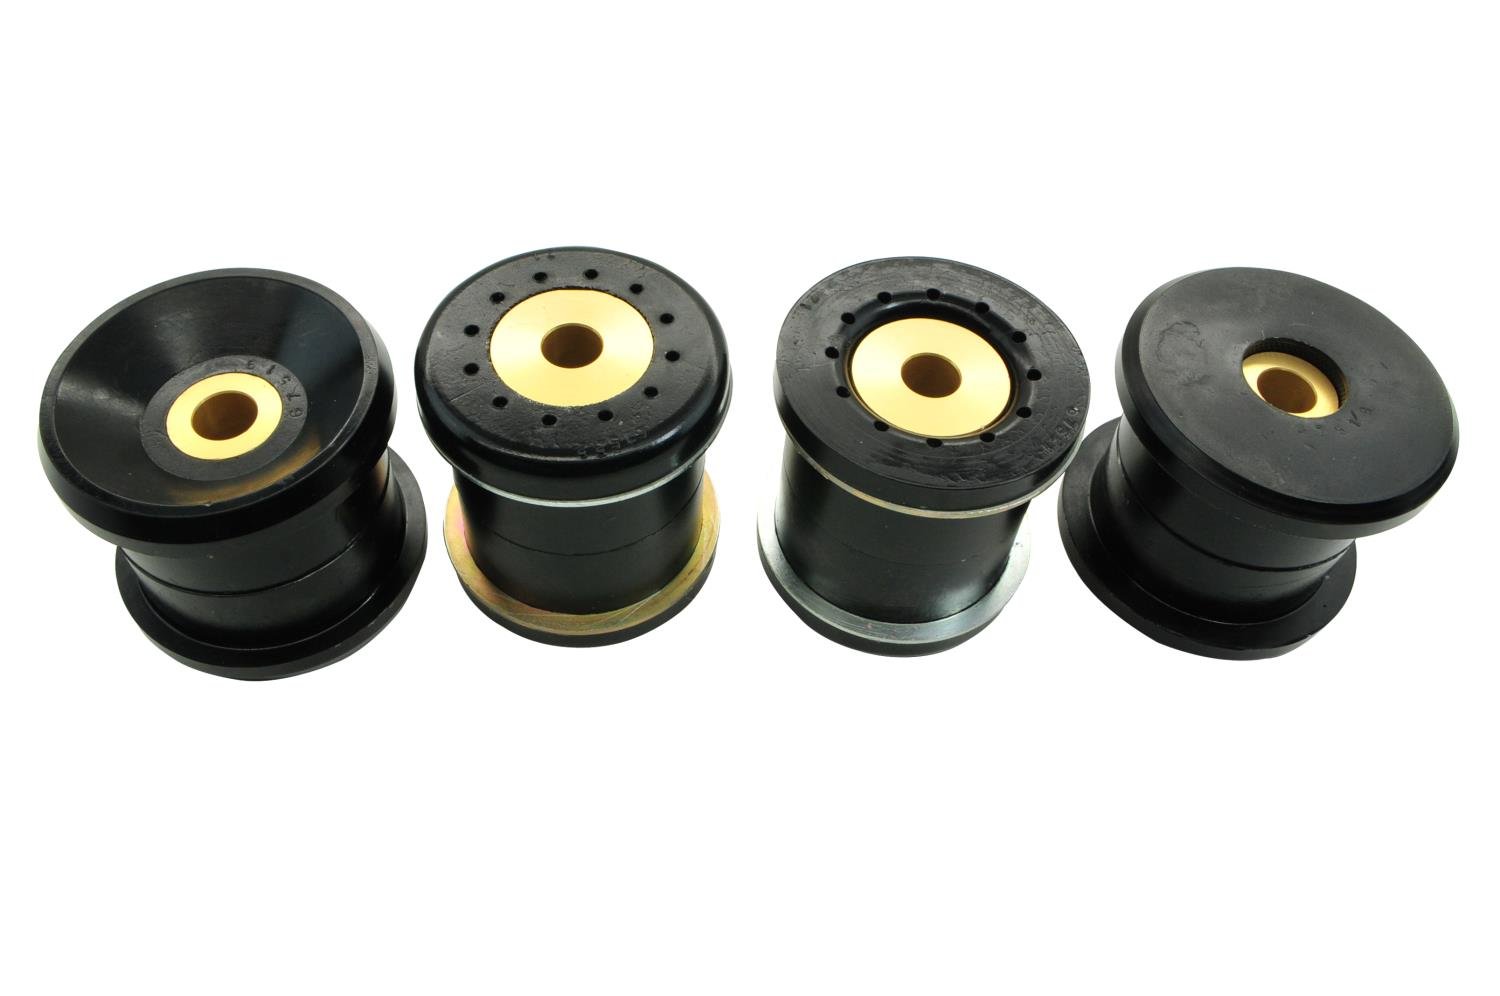 KDT917 Front and Rear Mount Bushing for 2005+ BMW 1 Series, 2005-2011 3 Series